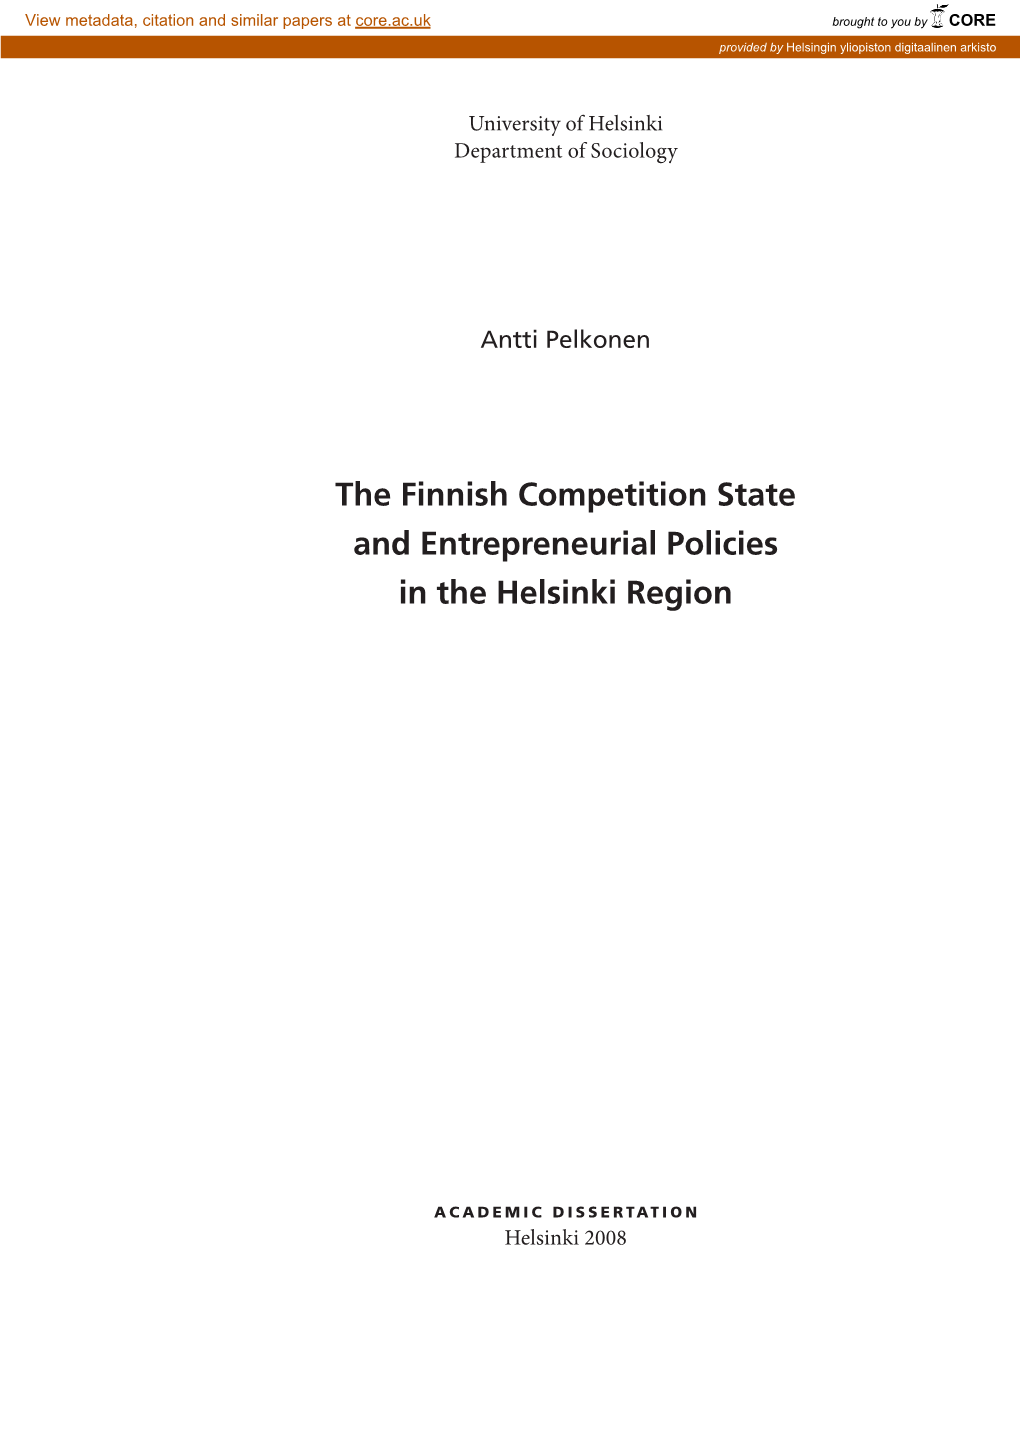 The Finnish Competition State and Entrepreneurial Policies in the Helsinki Region